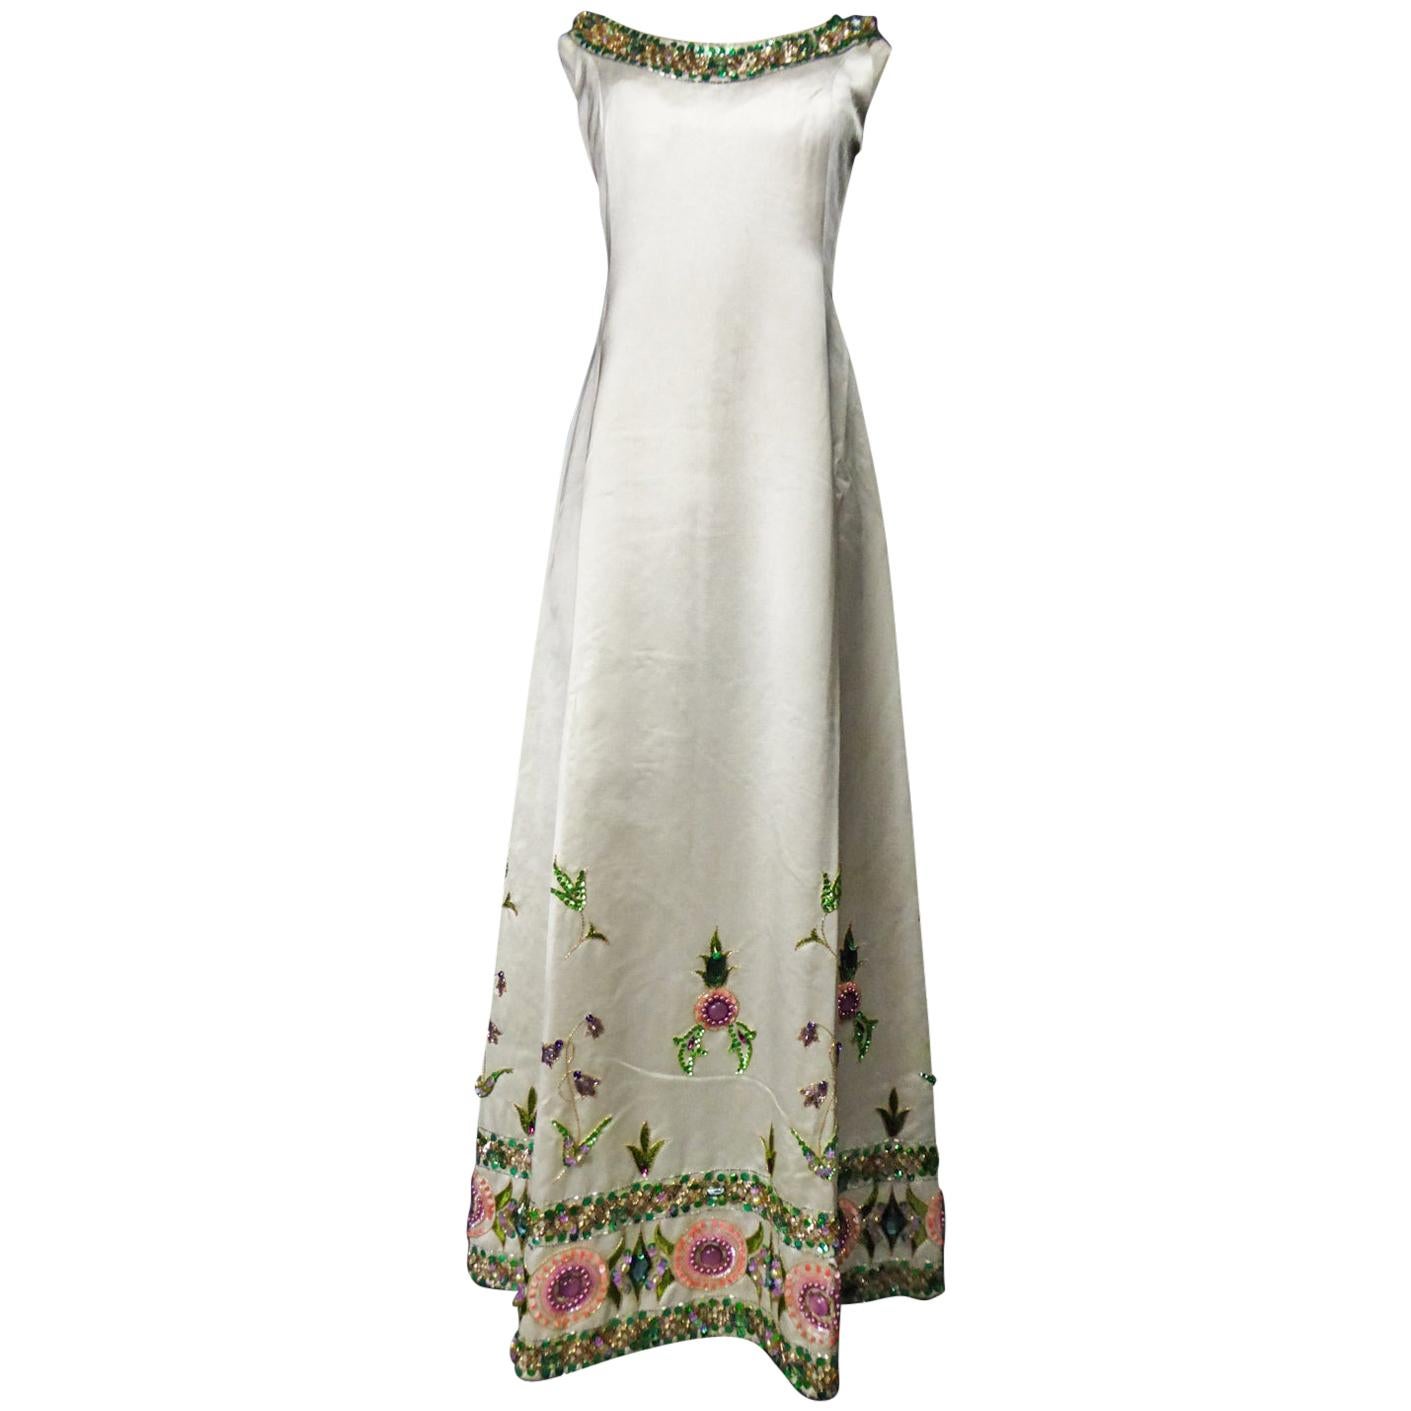 A Paulette Buraud Spangled and Embroidered French Ceremony Dress Circa 1968